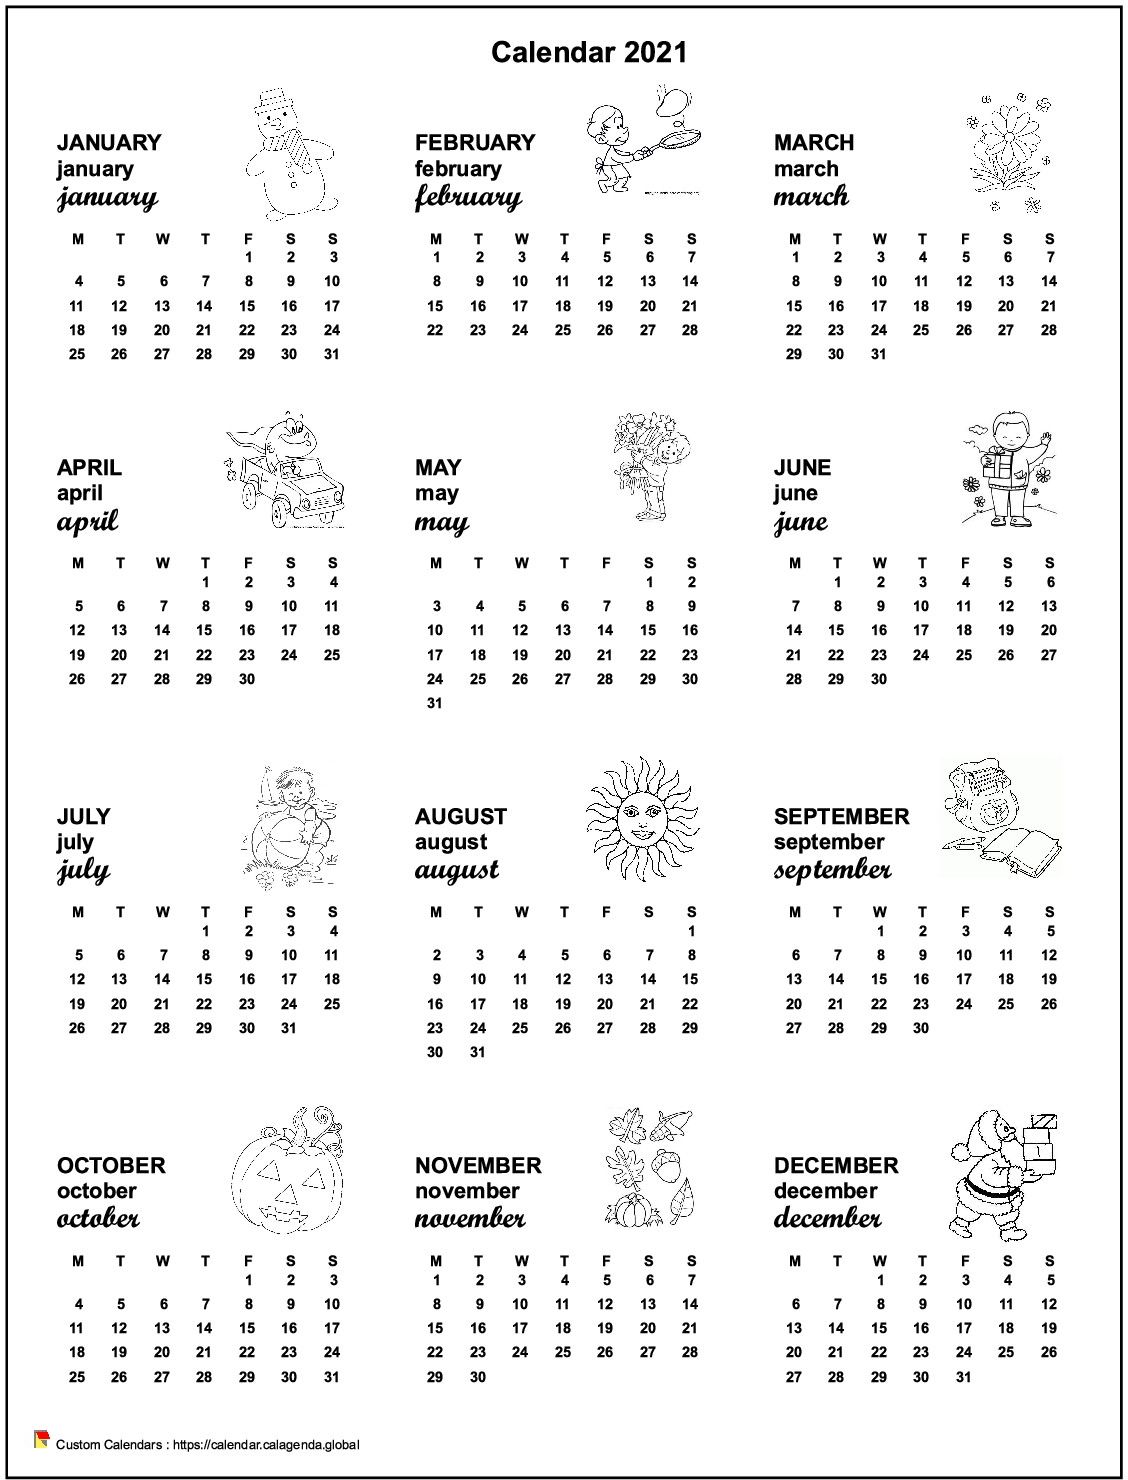 Calendar 2031 annual maternal and primary school